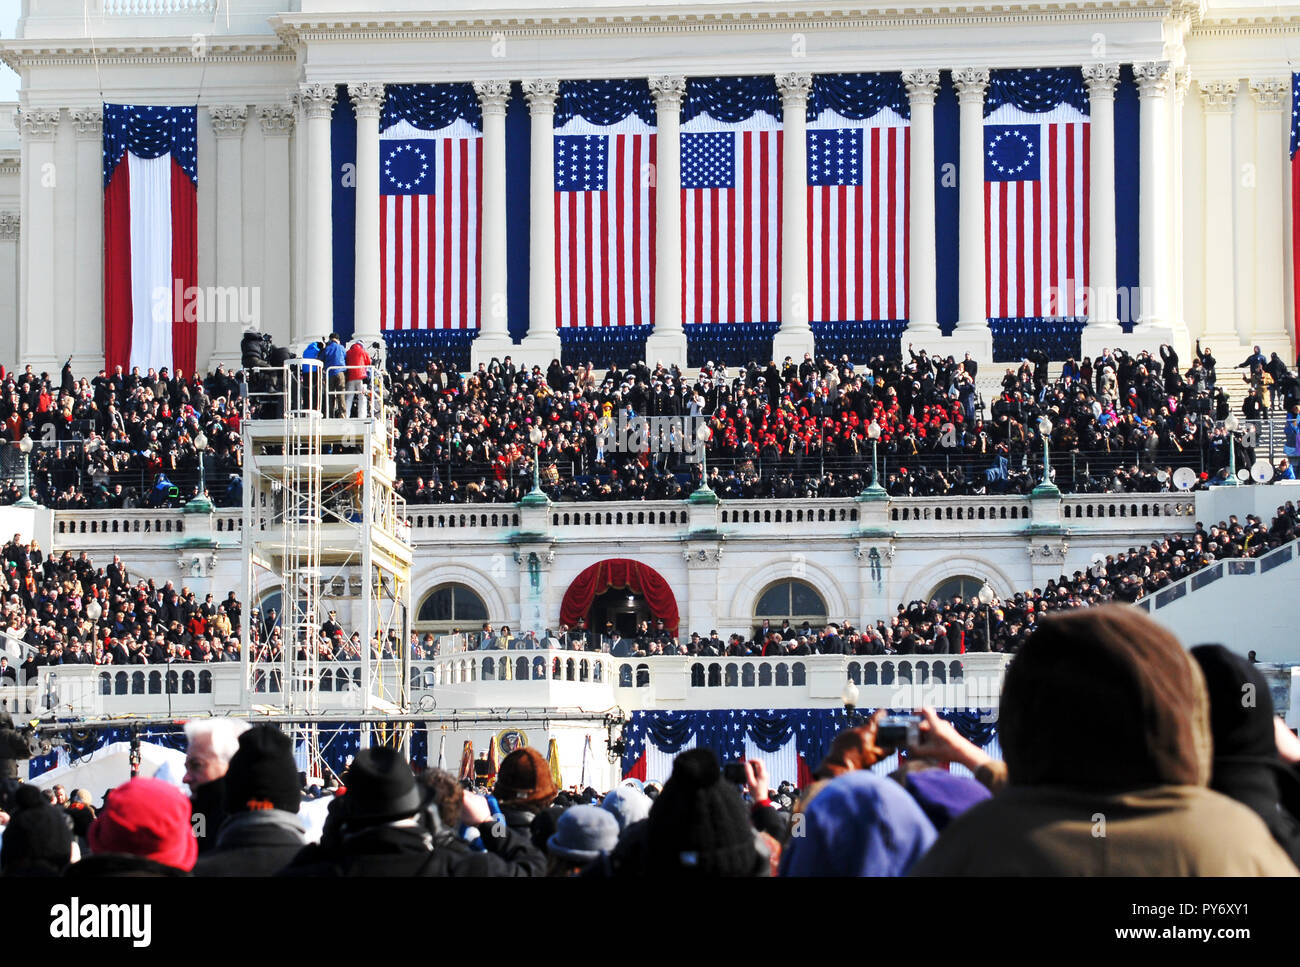 A crowd of well-wishers watch as President Barack Obama takes the oath of office as the nation's 44th president and commander in chief. DoD photo by Yeoman 1st Class Donna Lou Morgan, U.S. Navy Stock Photo